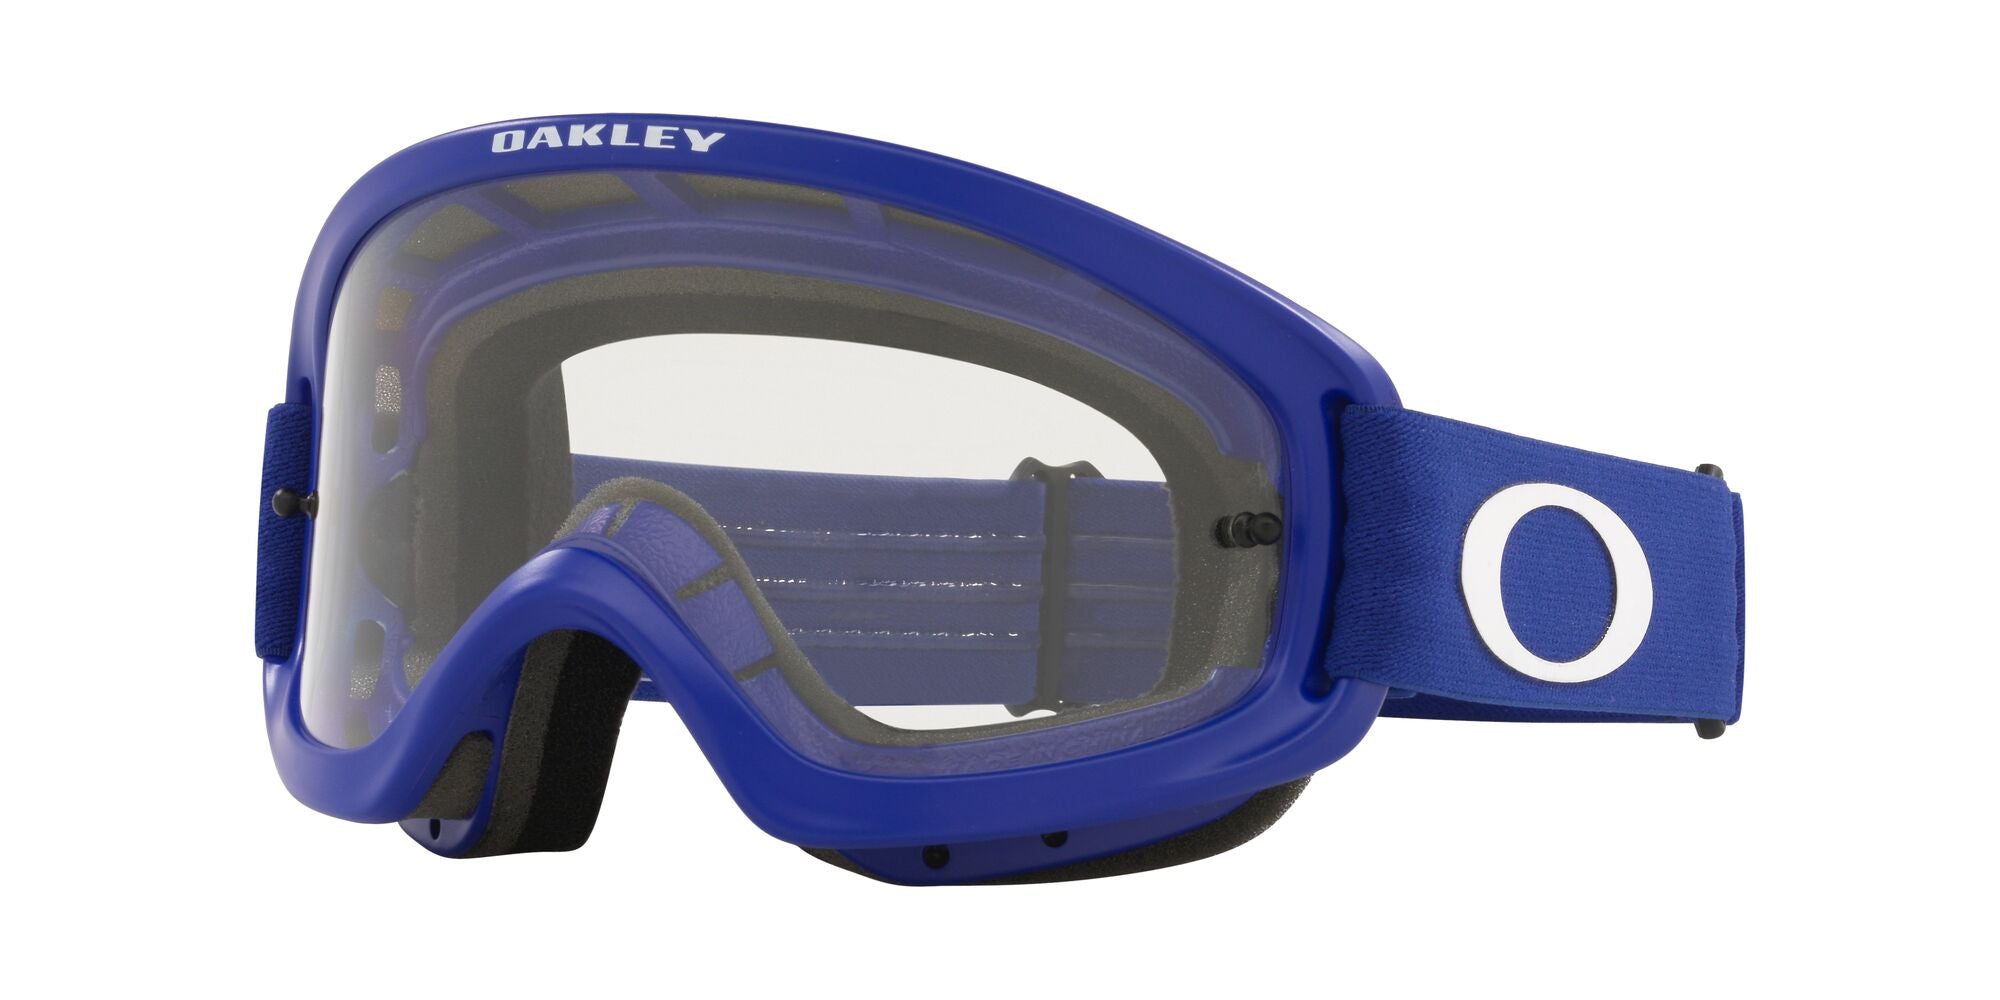 Oakley O Frame 2.0 Pro XS MX Goggle in Moto Blue with Clear Lens on White Background